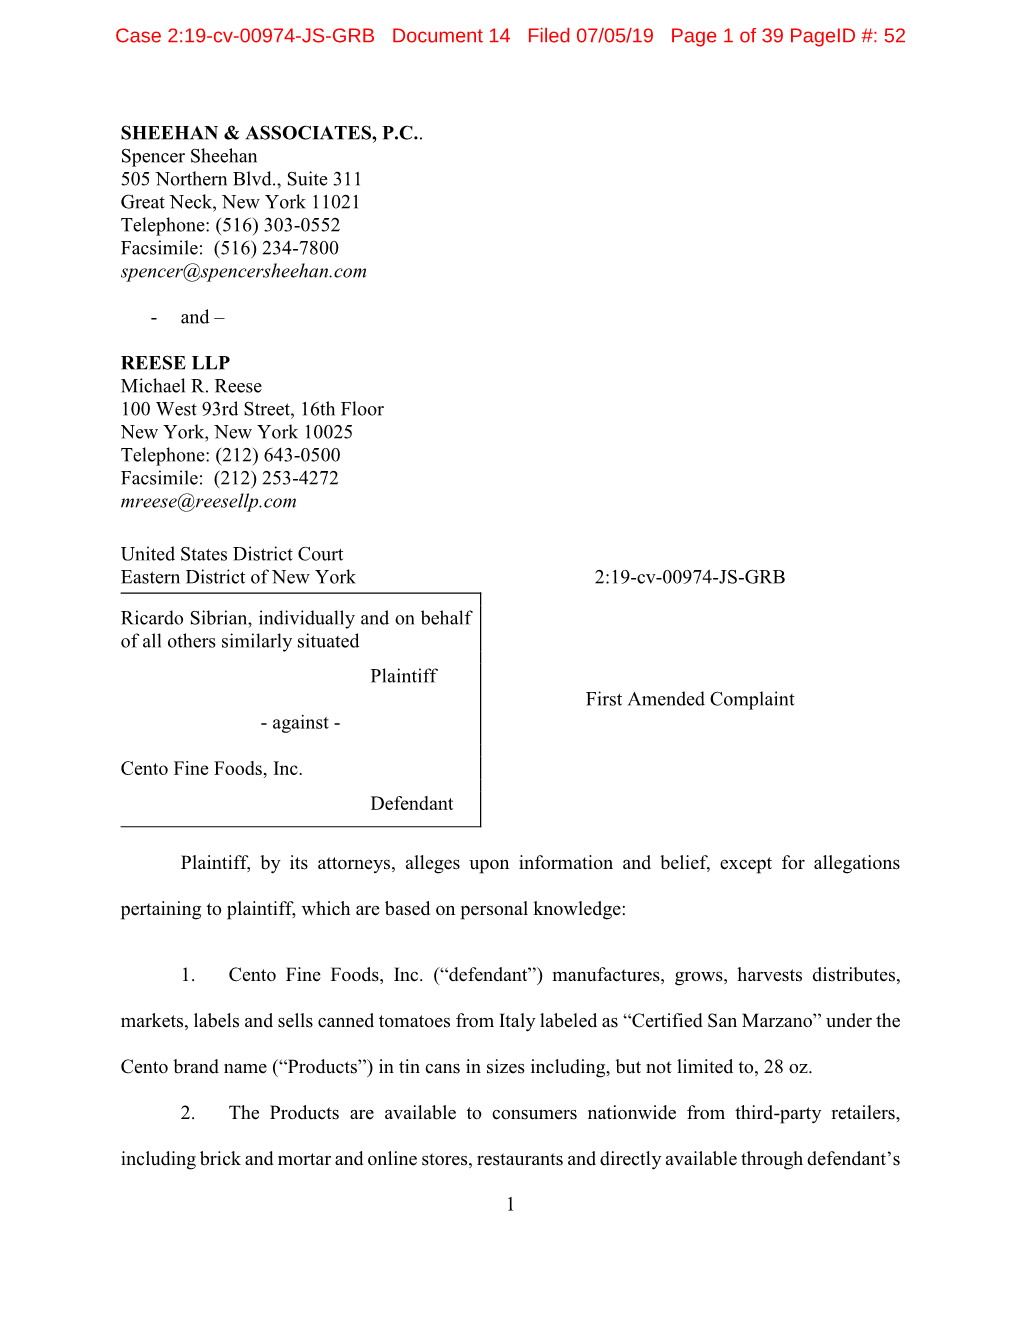 Amended Complaint - Against